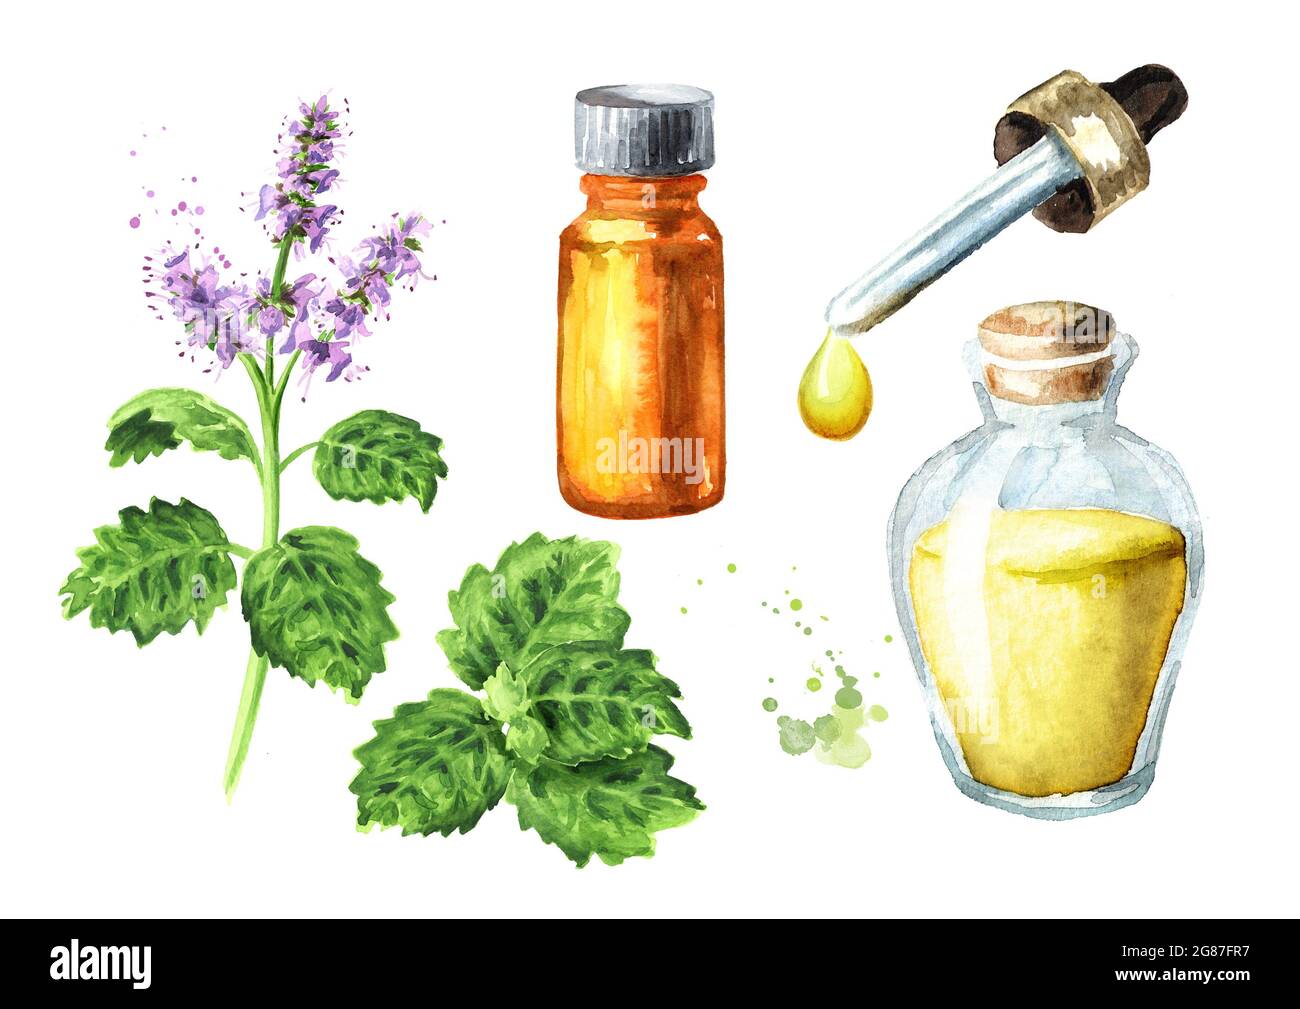 Patchouli or Pogostemon cablini essential oil set. Hand drawn watercolor illustration isolated on white background Stock Photo